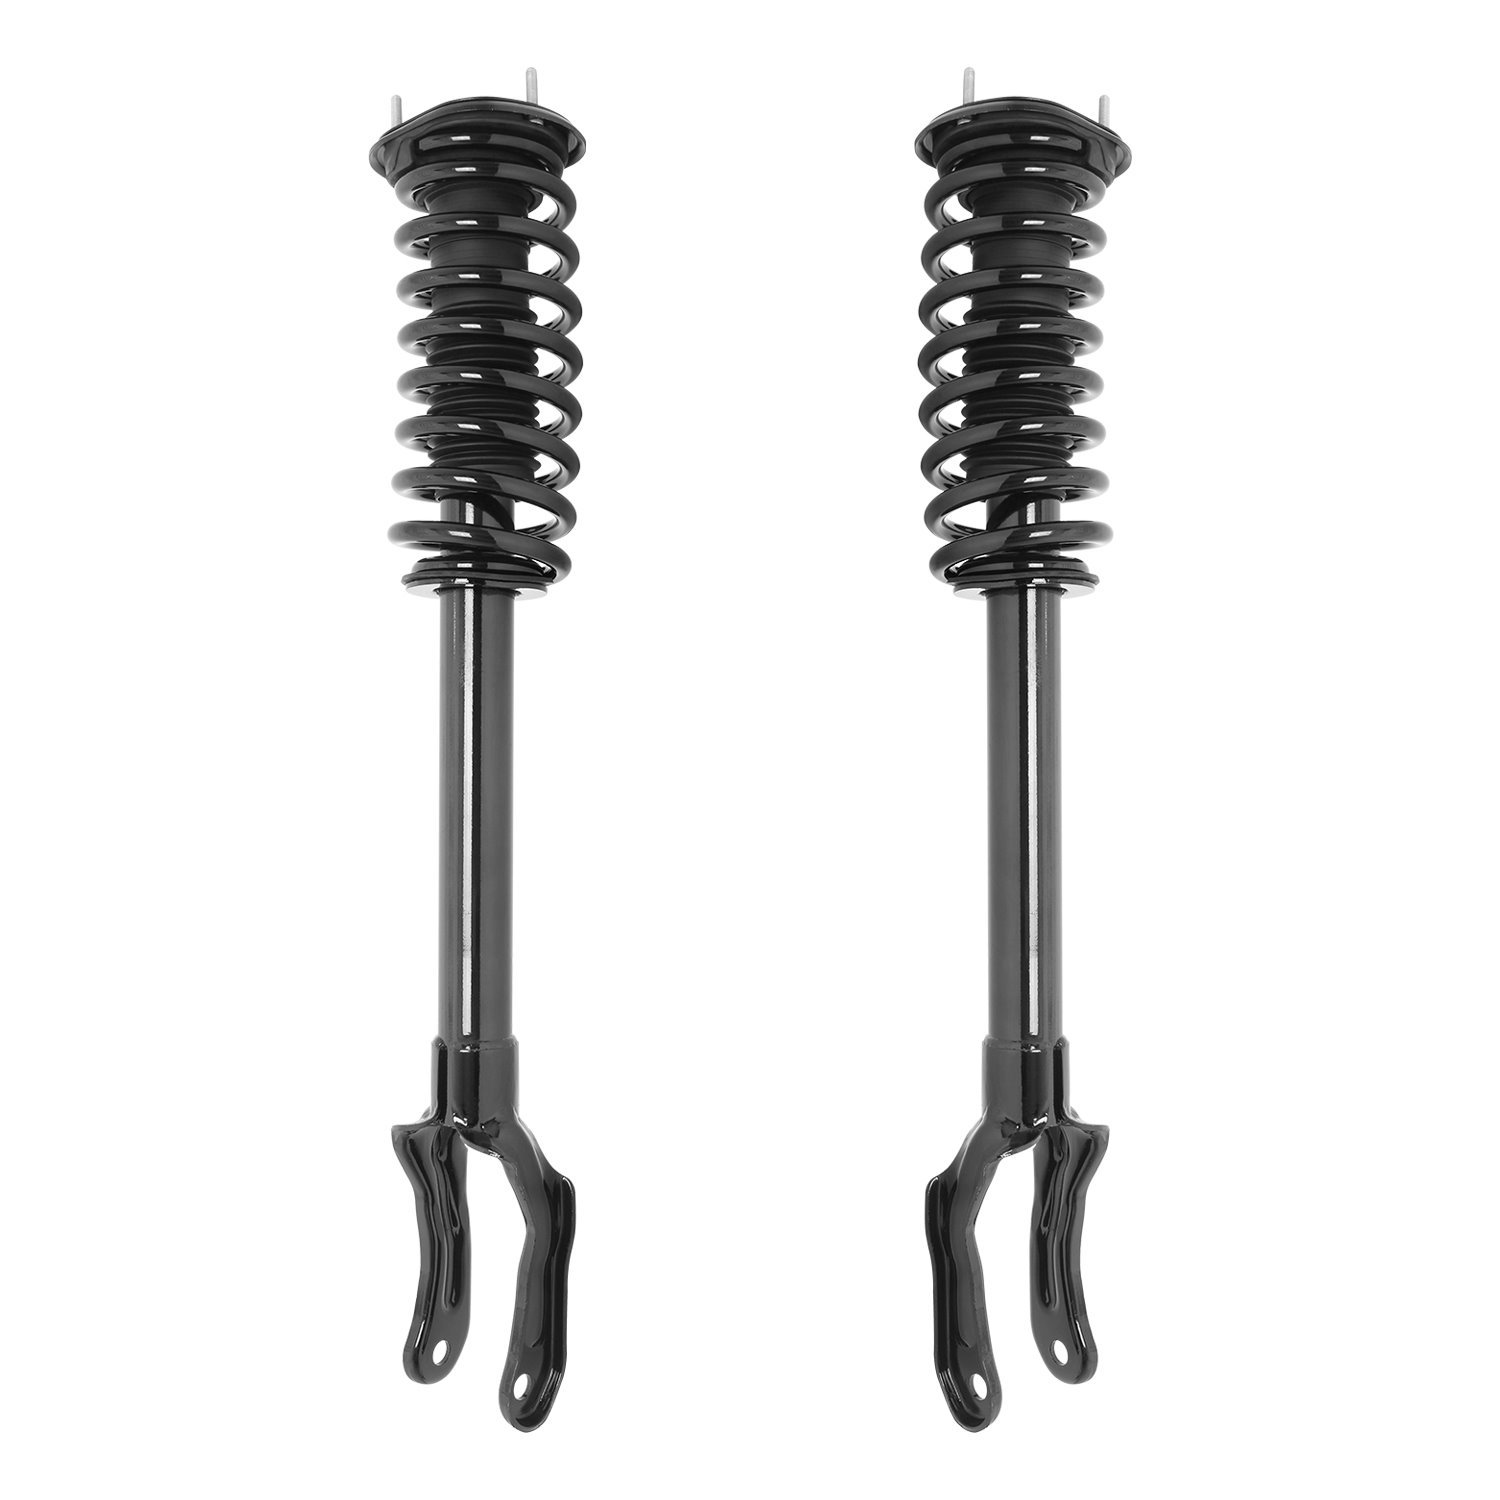 2-11213-11214-001 Suspension Strut & Coil Spring Assembly Set Fits Select Jeep Grand Cherokee